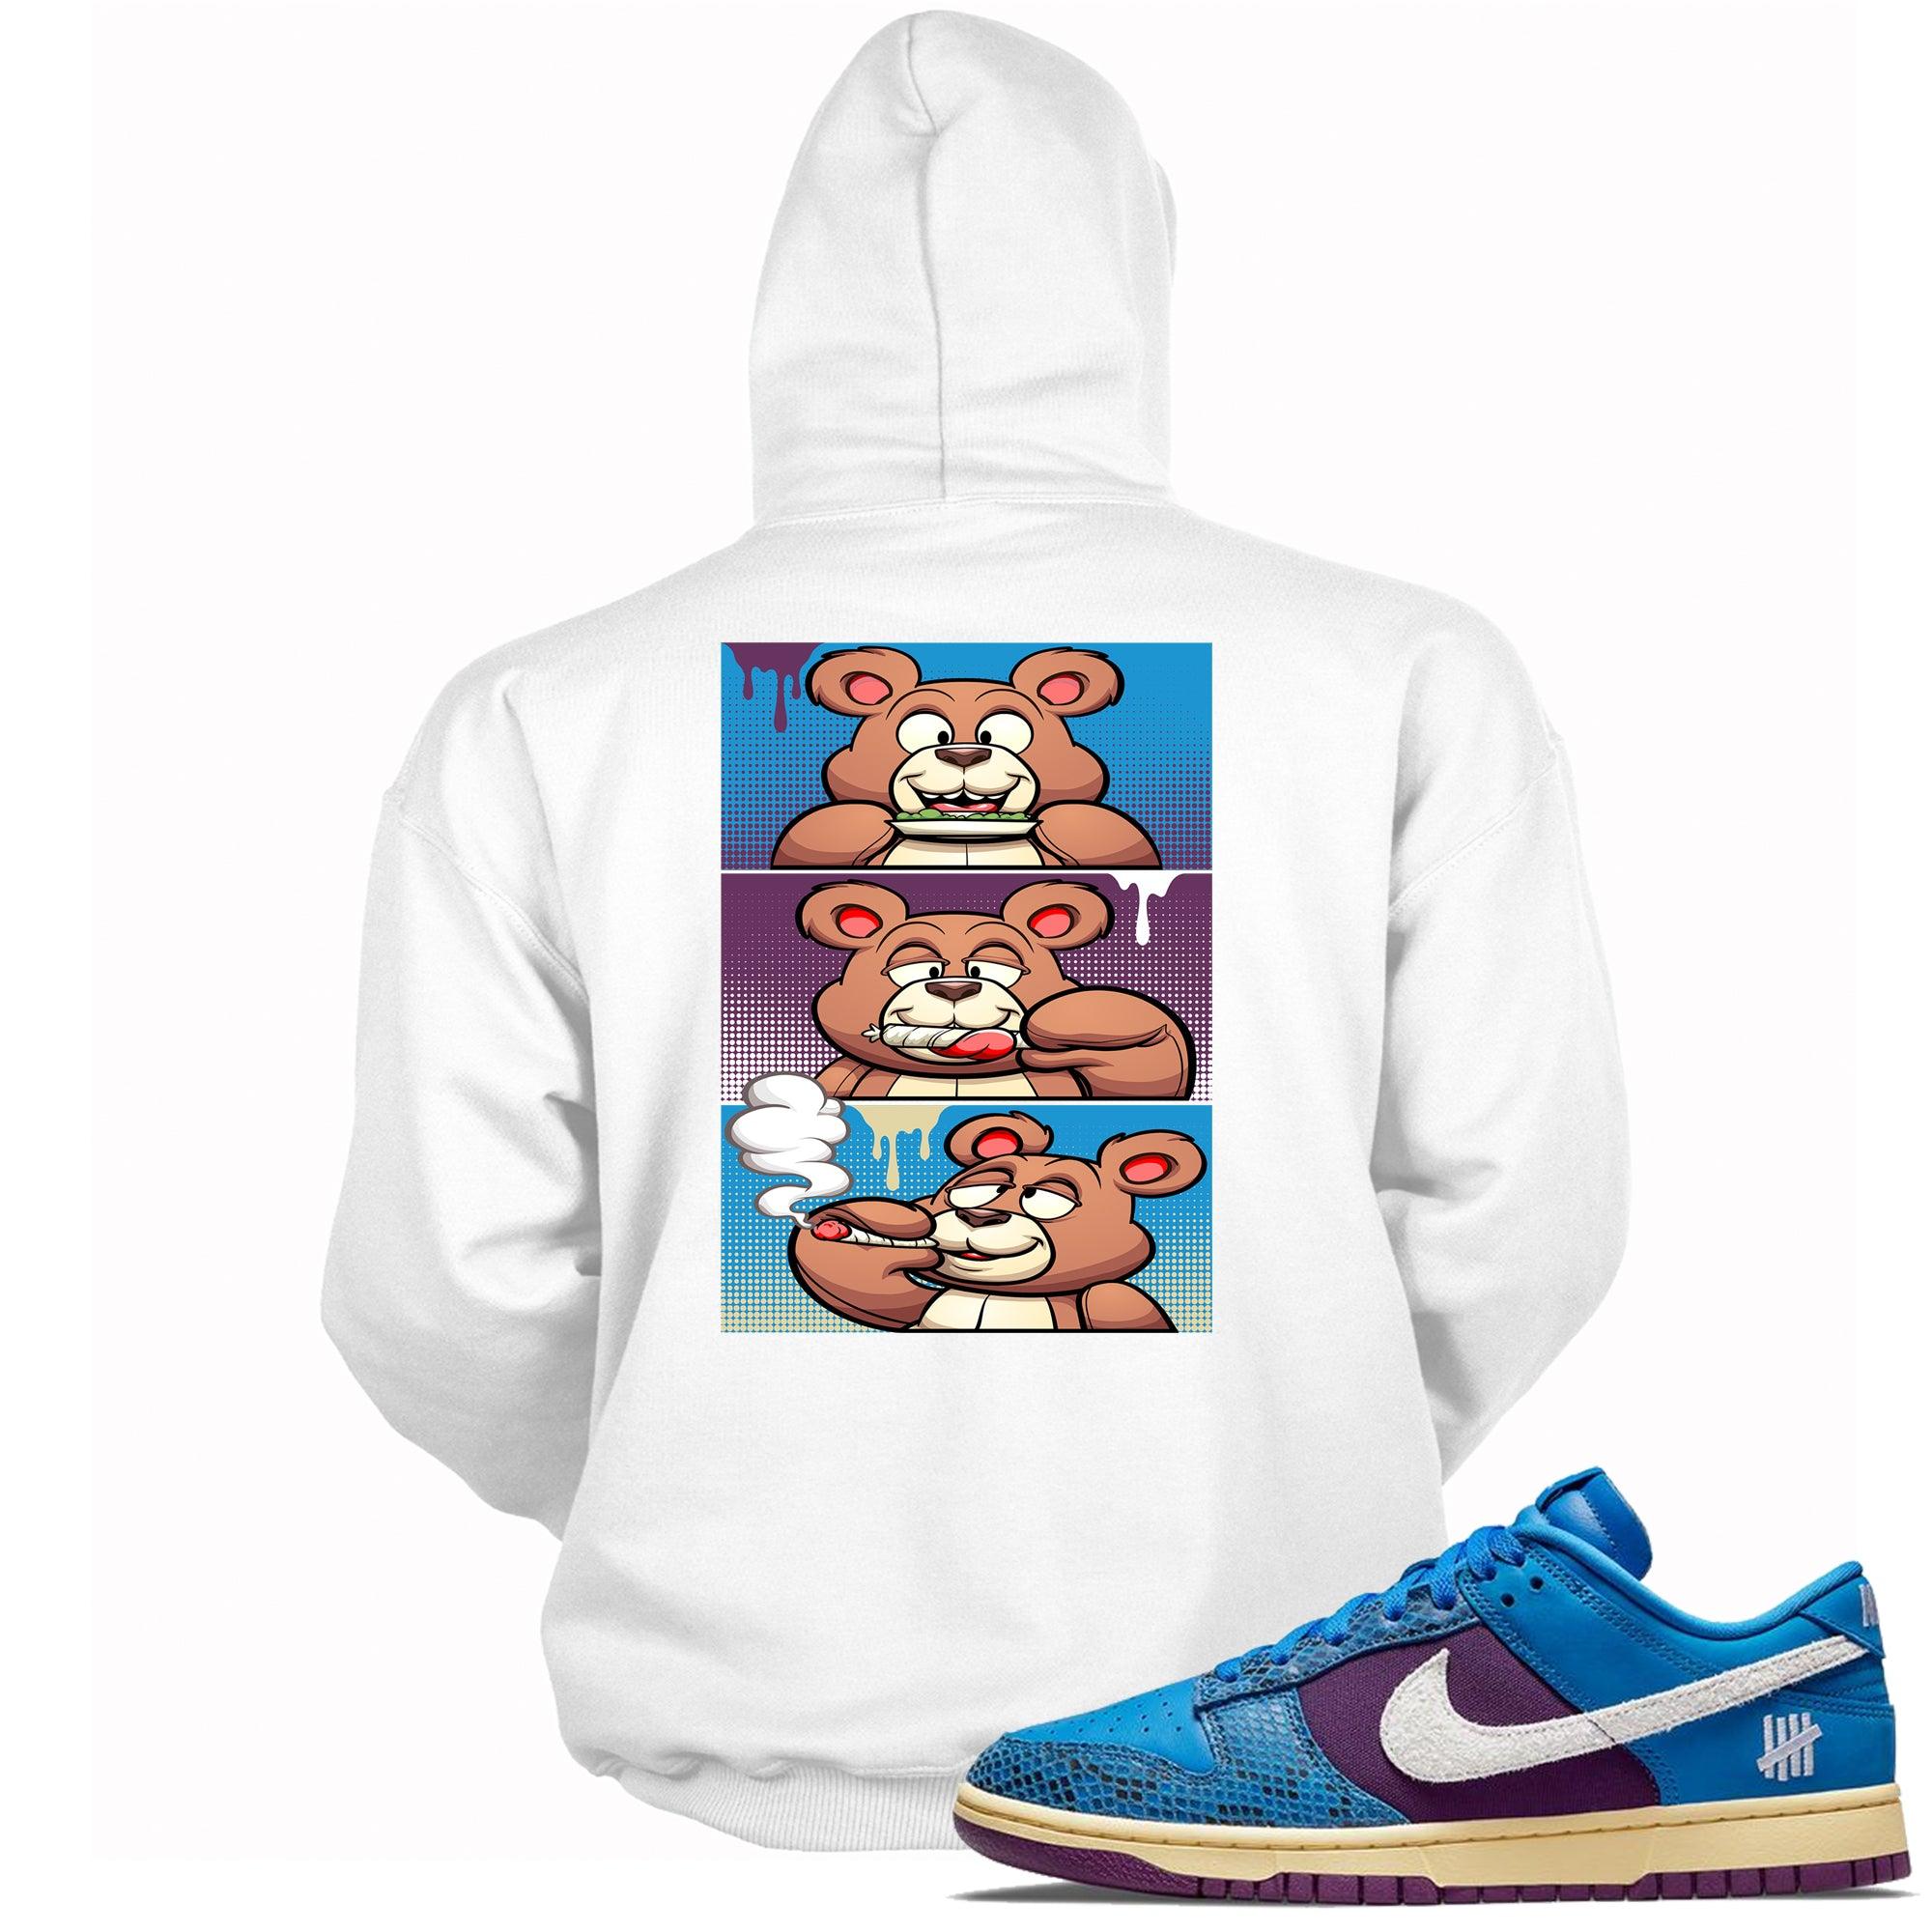 Roll It Hoodie Nike Dunk Low Undefeated 5 On It Dunk vs AF1 photo